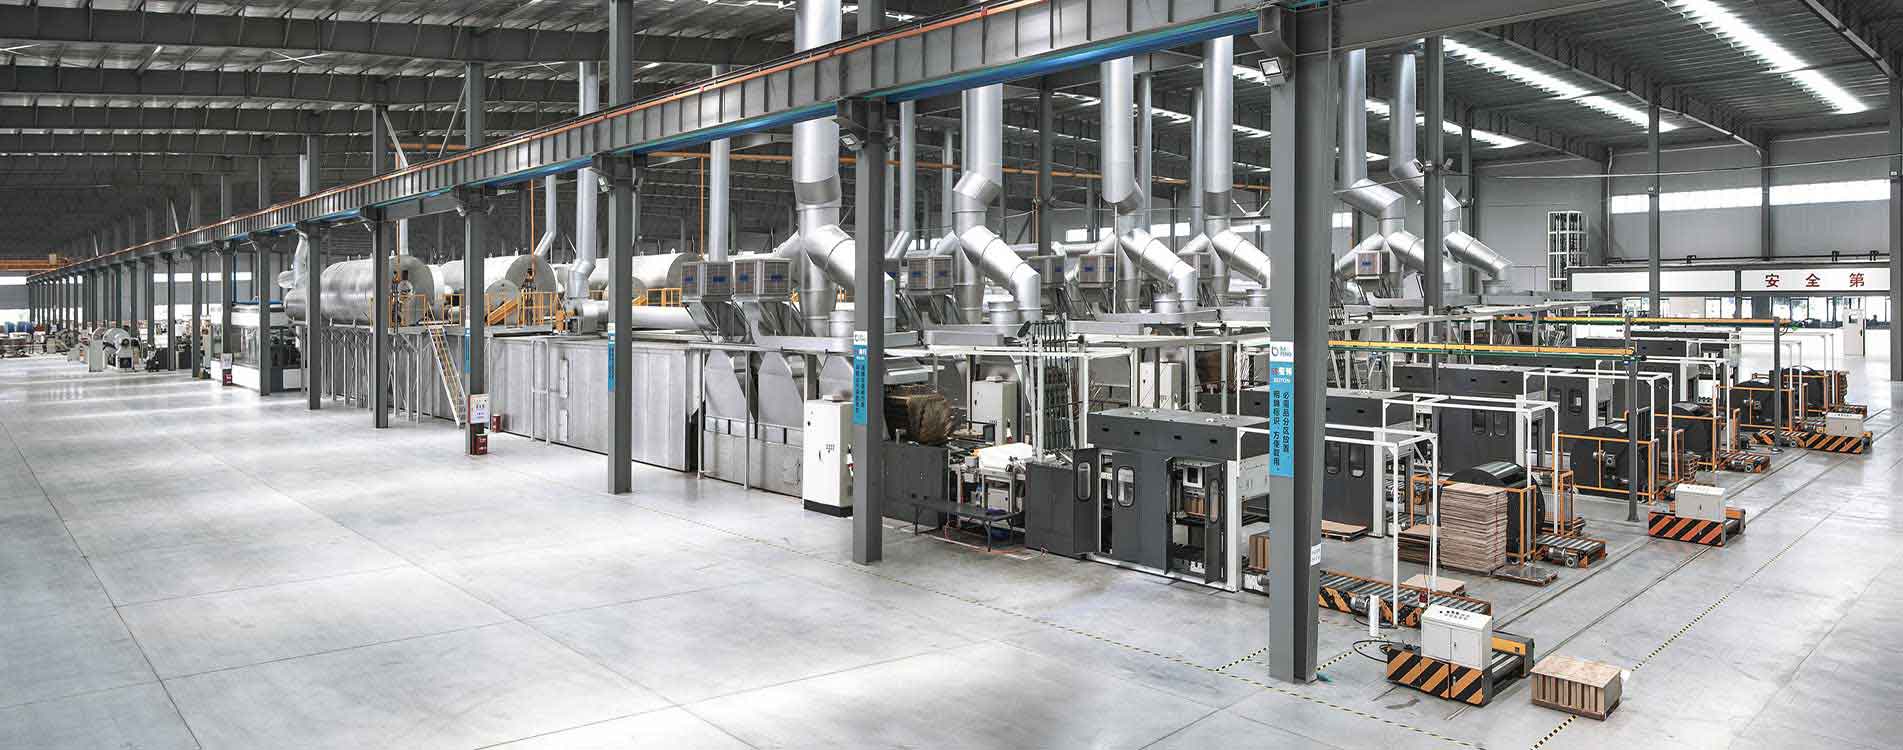 Baofeng has own coating and slitting line inside the easy open end manufacturing plant